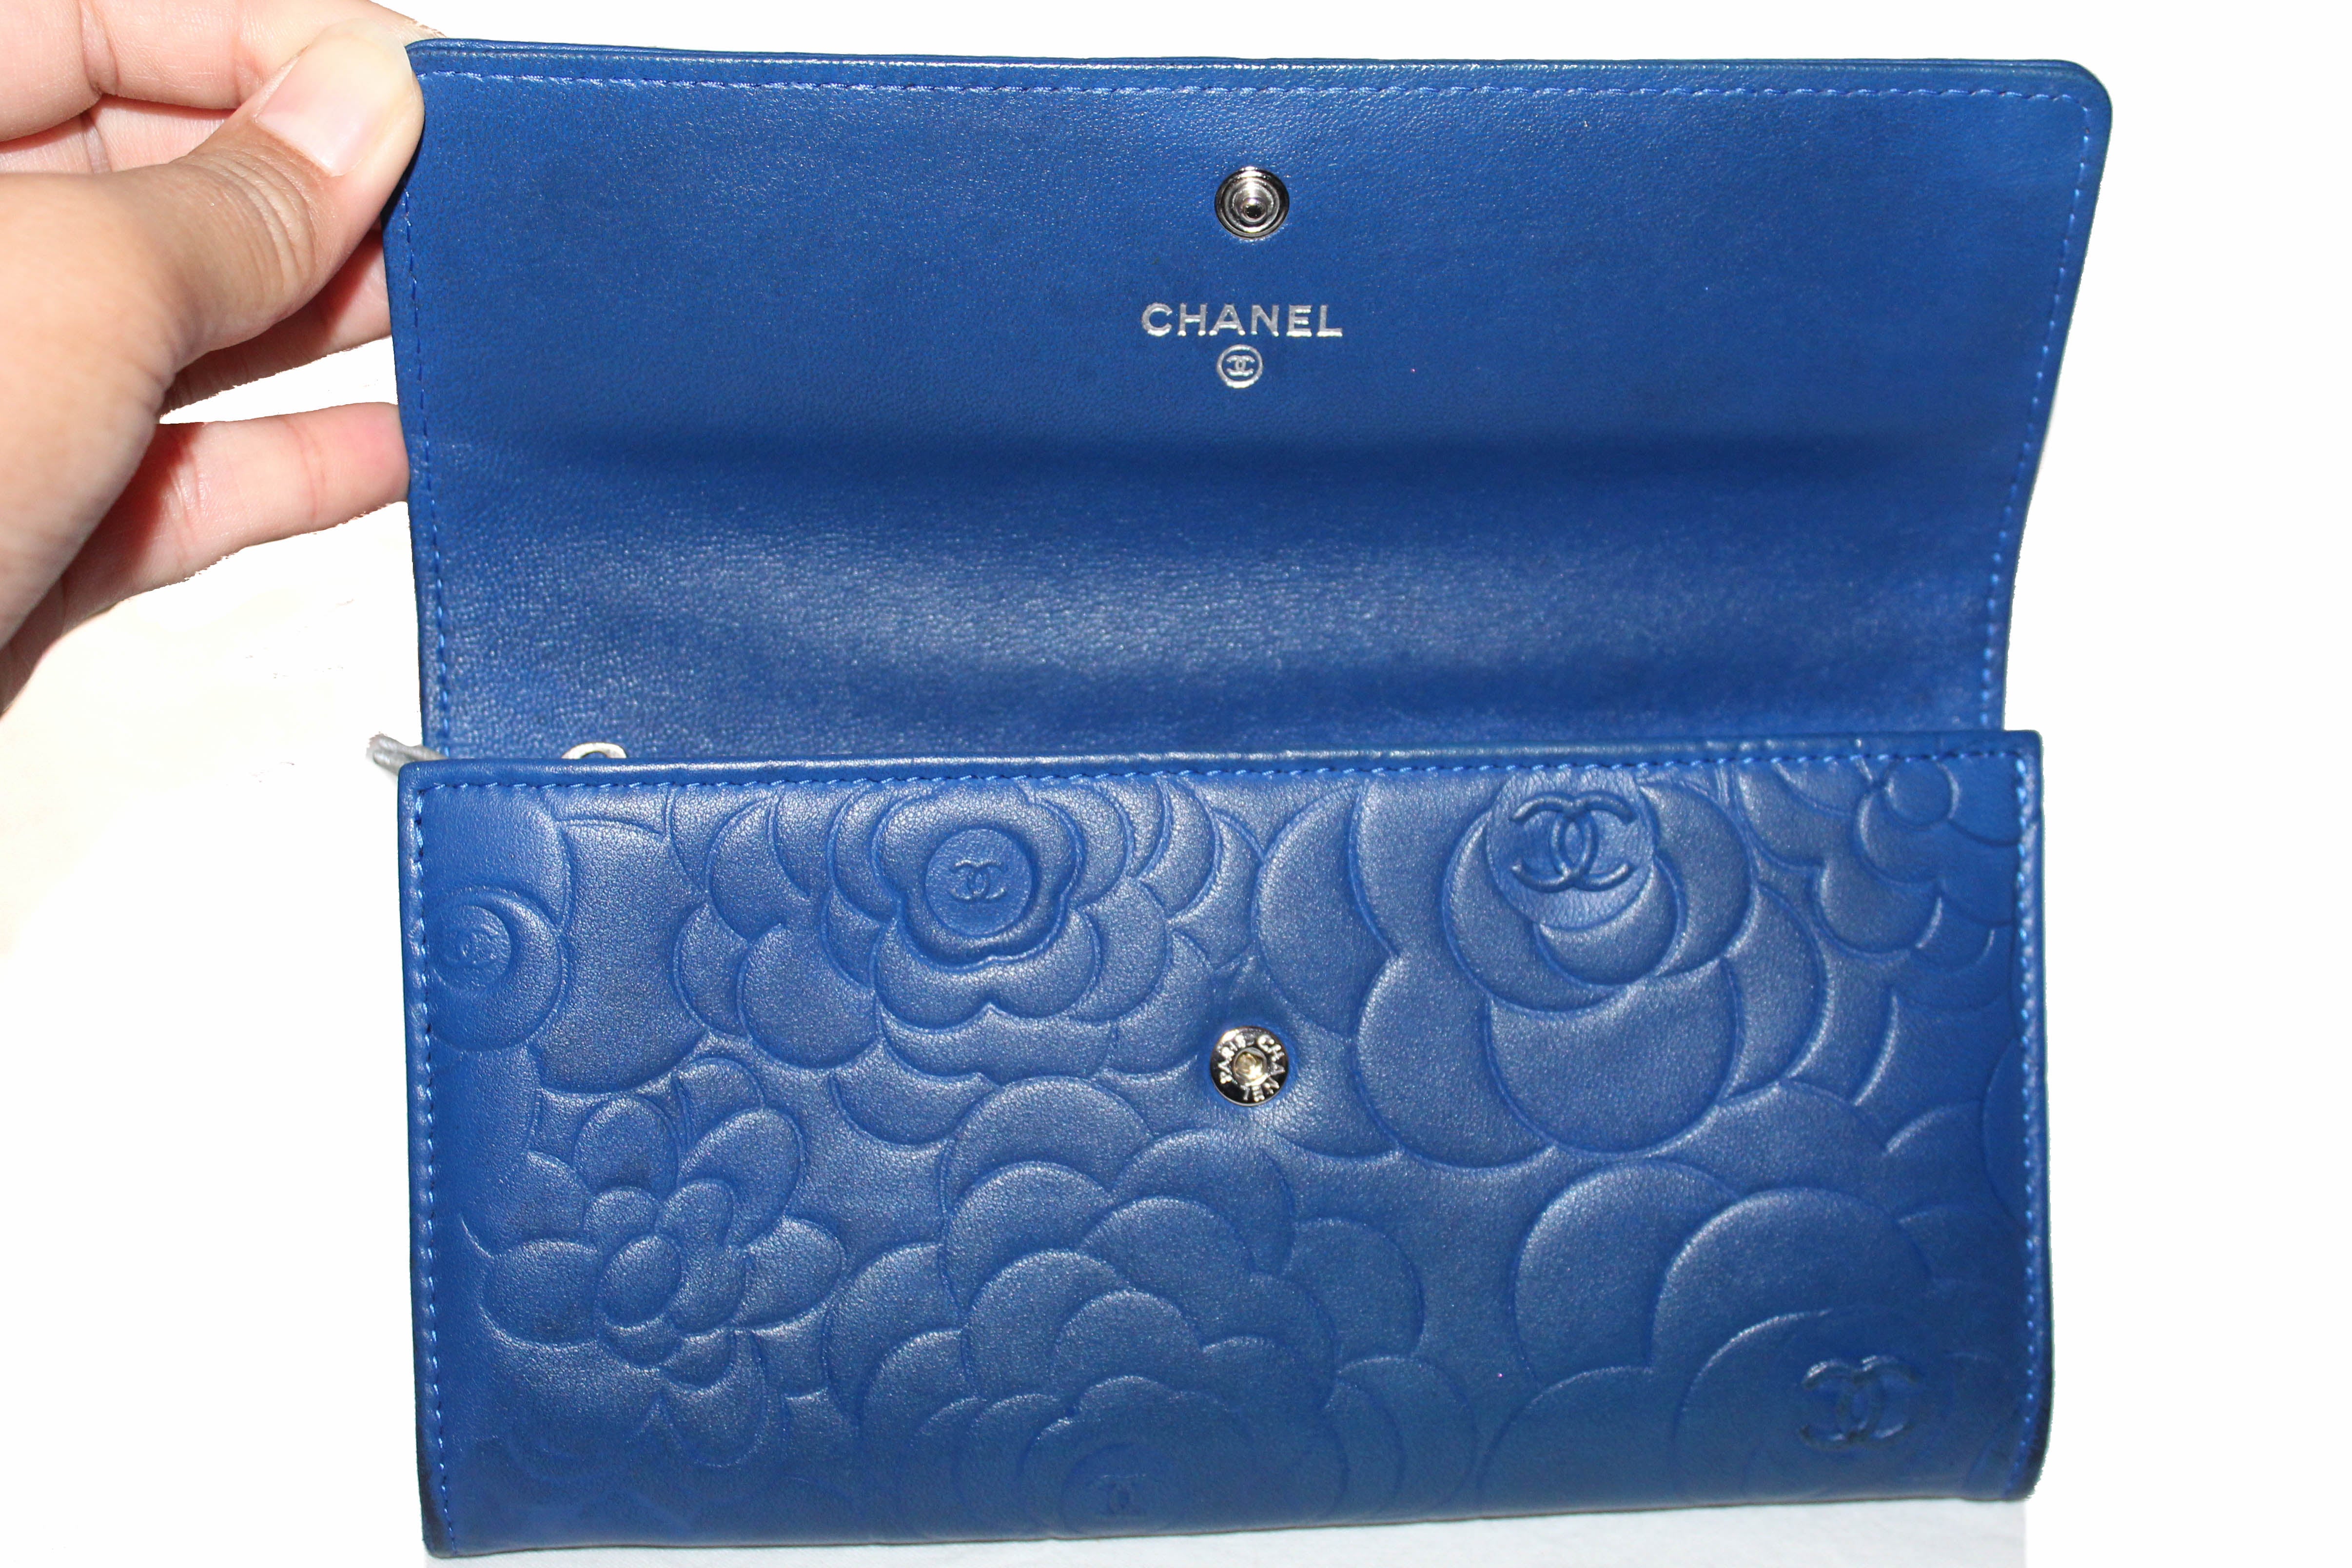 Authentic Chanel Blue Lambskin Leather Camellia Flap Wallet